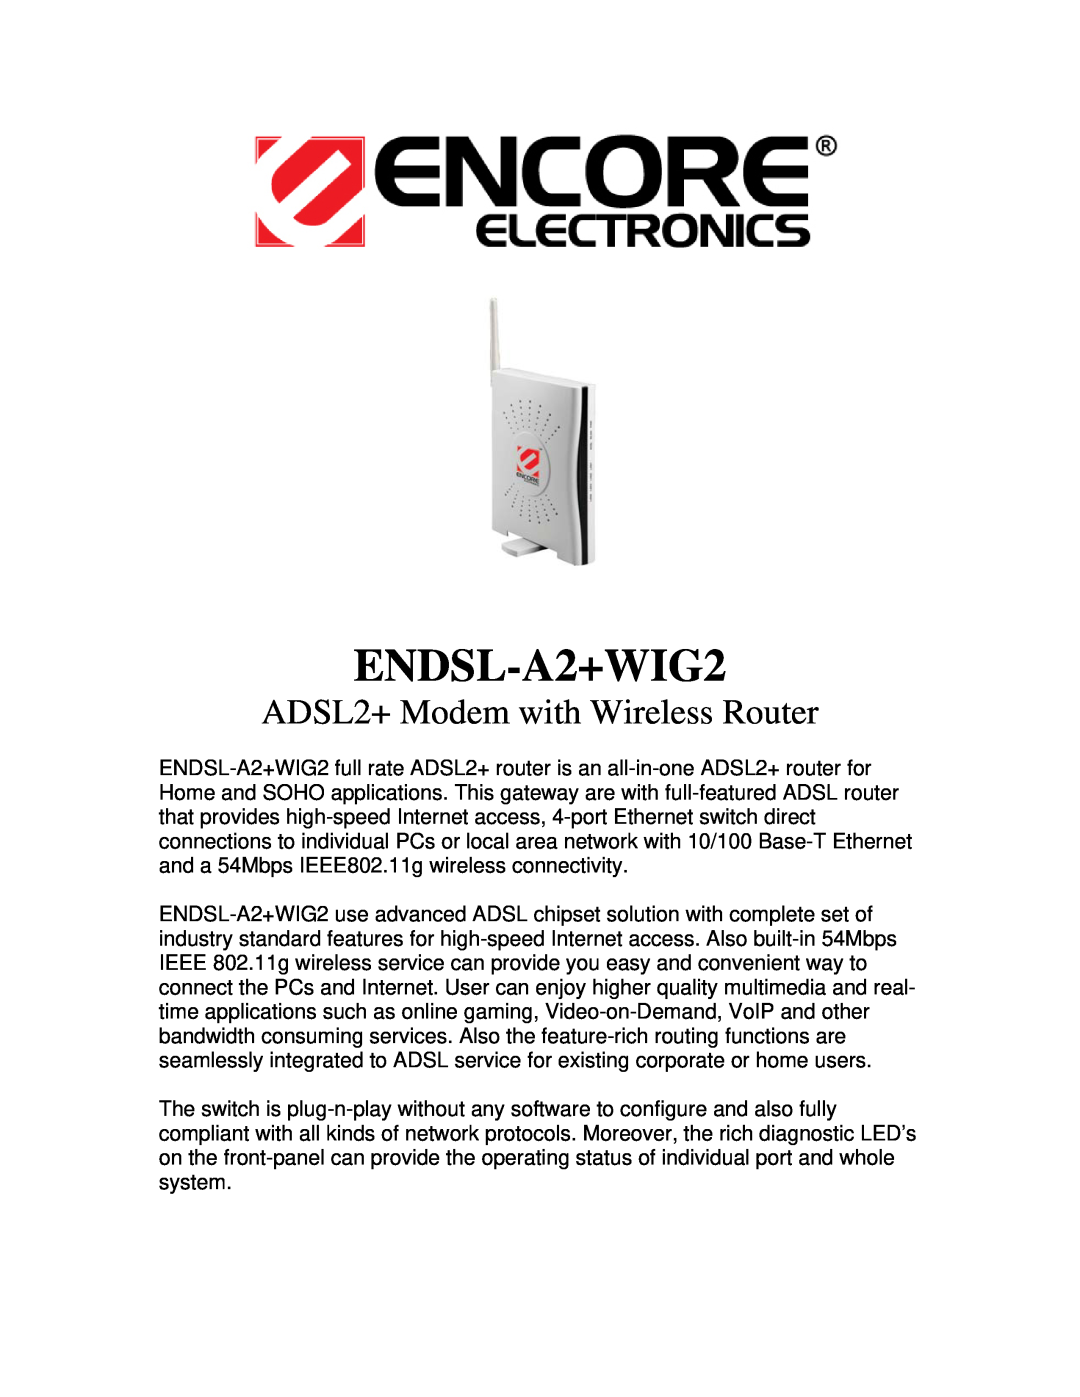 Encore electronic ENDSL-A2+WIG2 manual ADSL2+ Modem with Wireless Router 